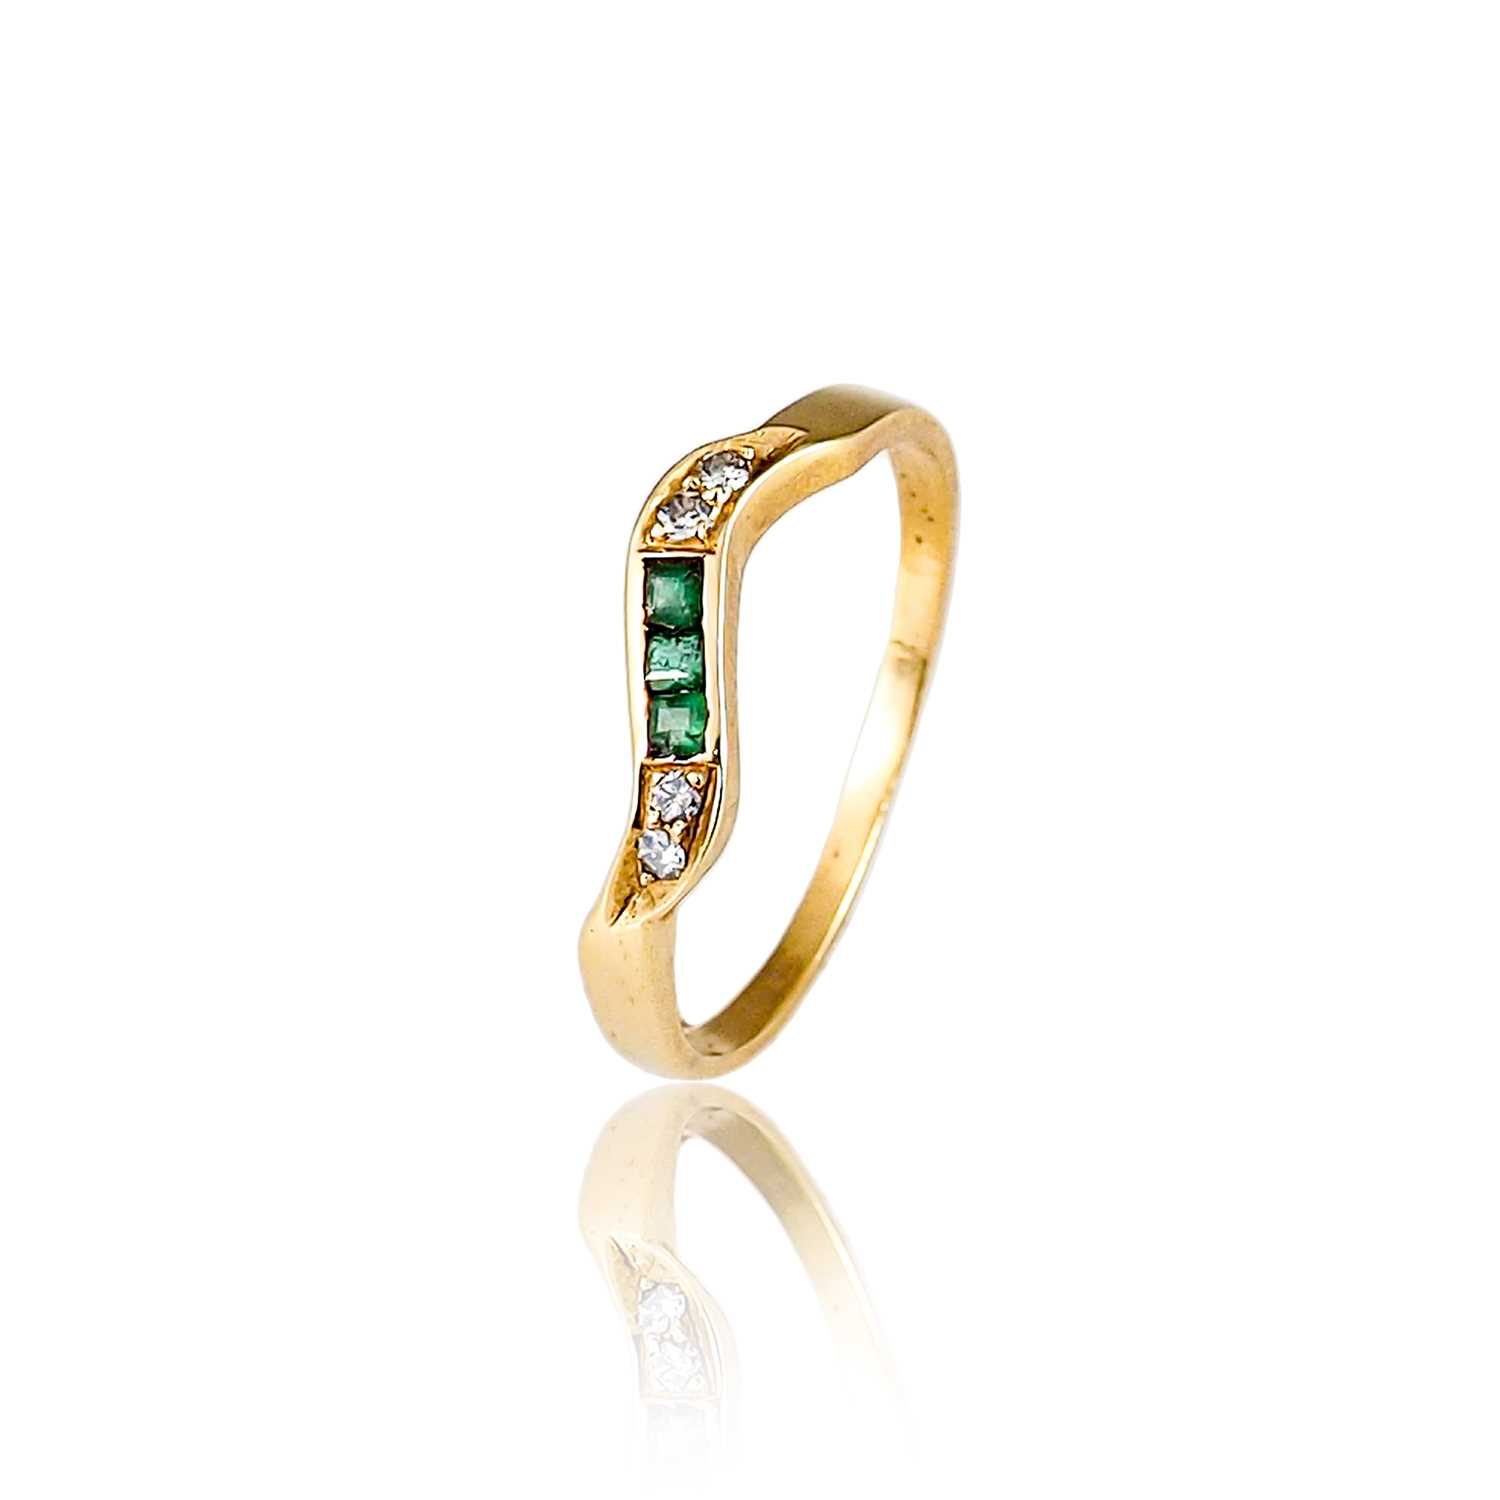 Lot 417 - Gold Ring set with Emerald and Diamond s